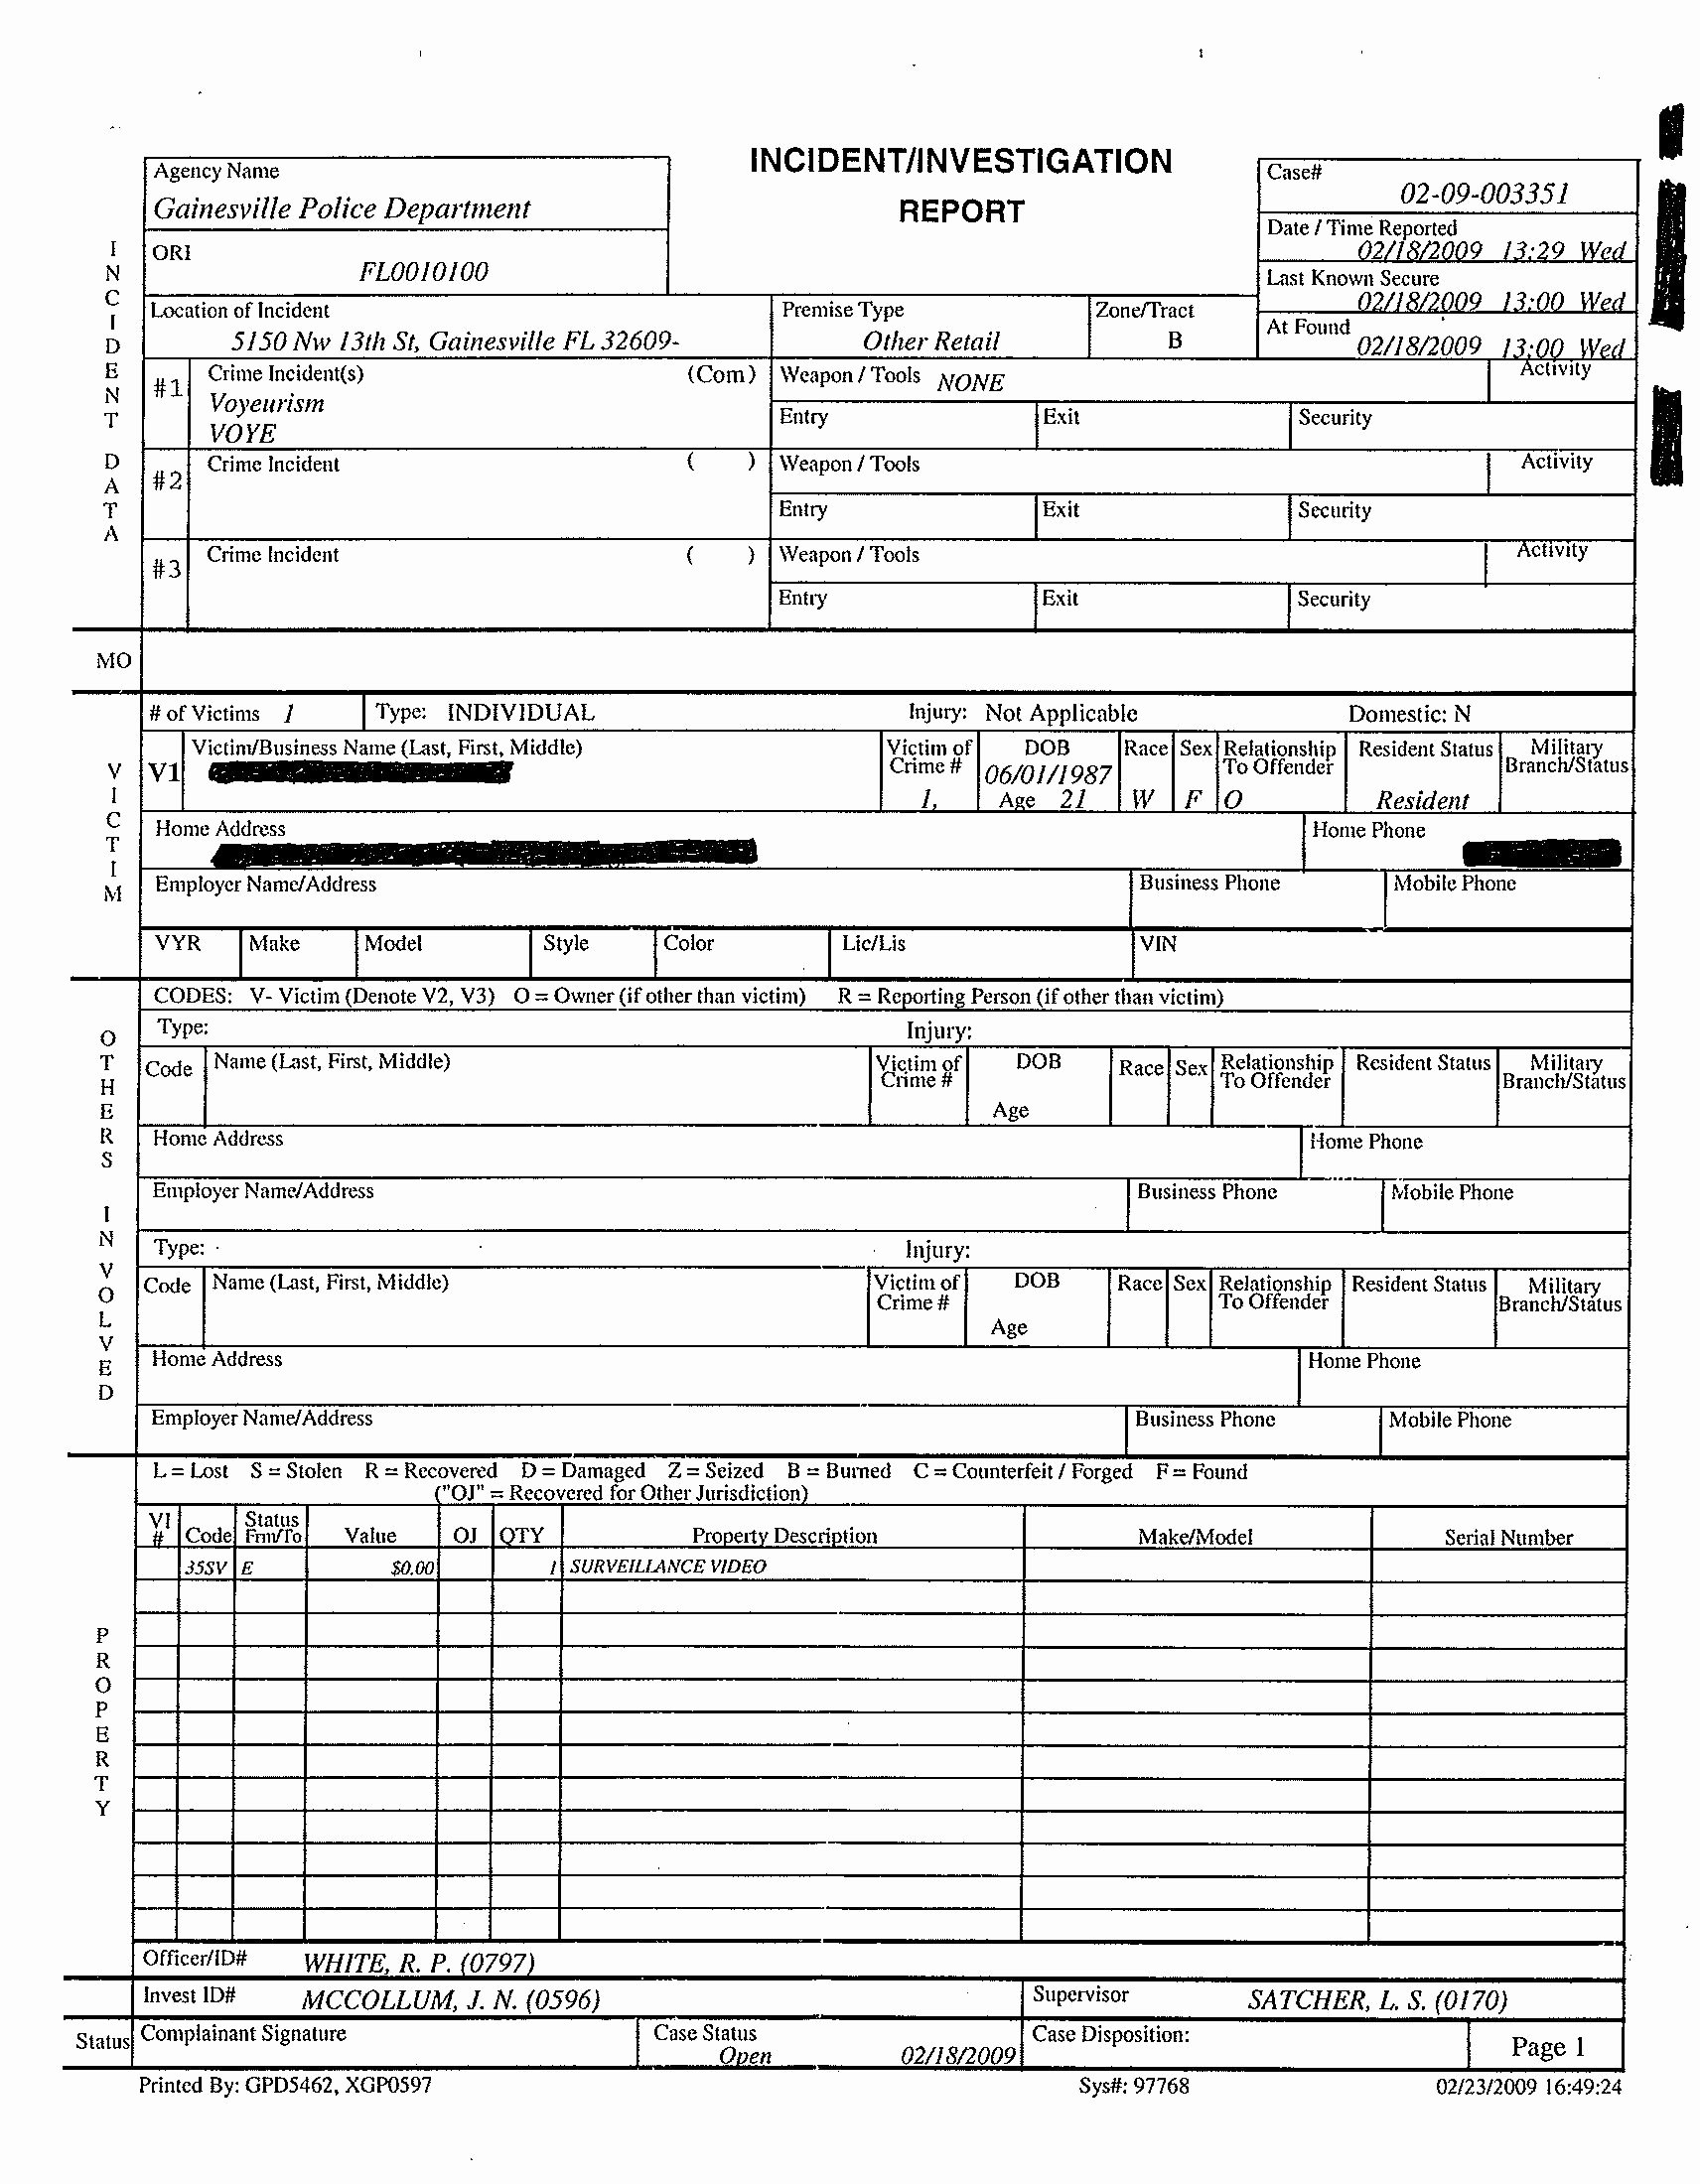 Homicide Police Report Template Awesome Pin by Chad Laybourne On Final Port